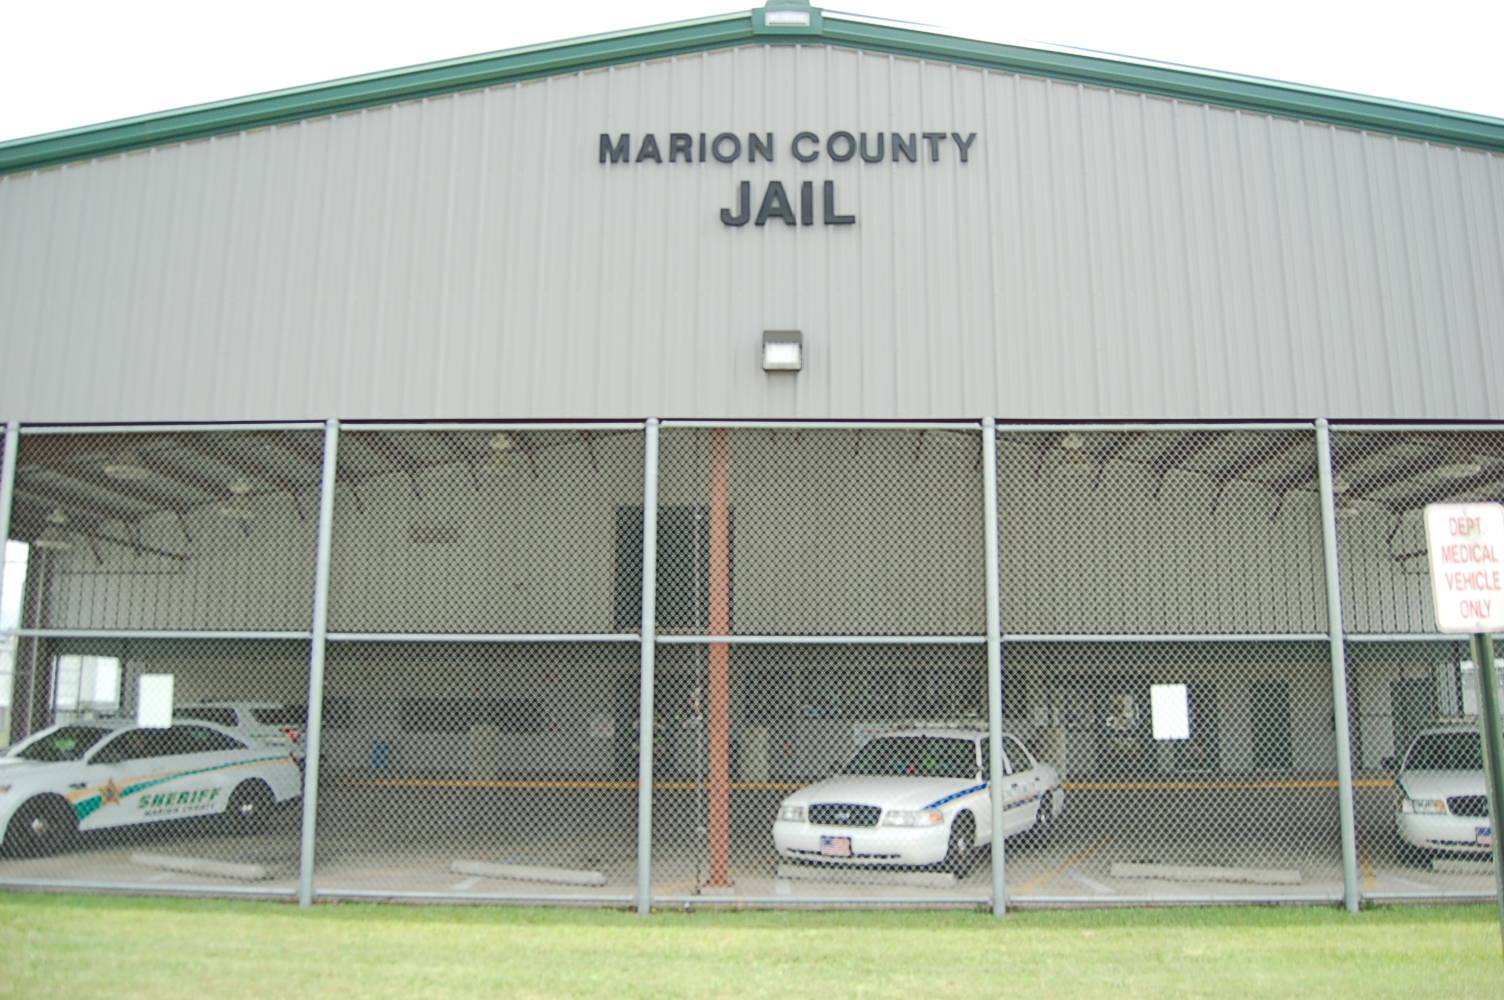 corrections officer resigns, ocala news, corruption, marion county news, marion county jail